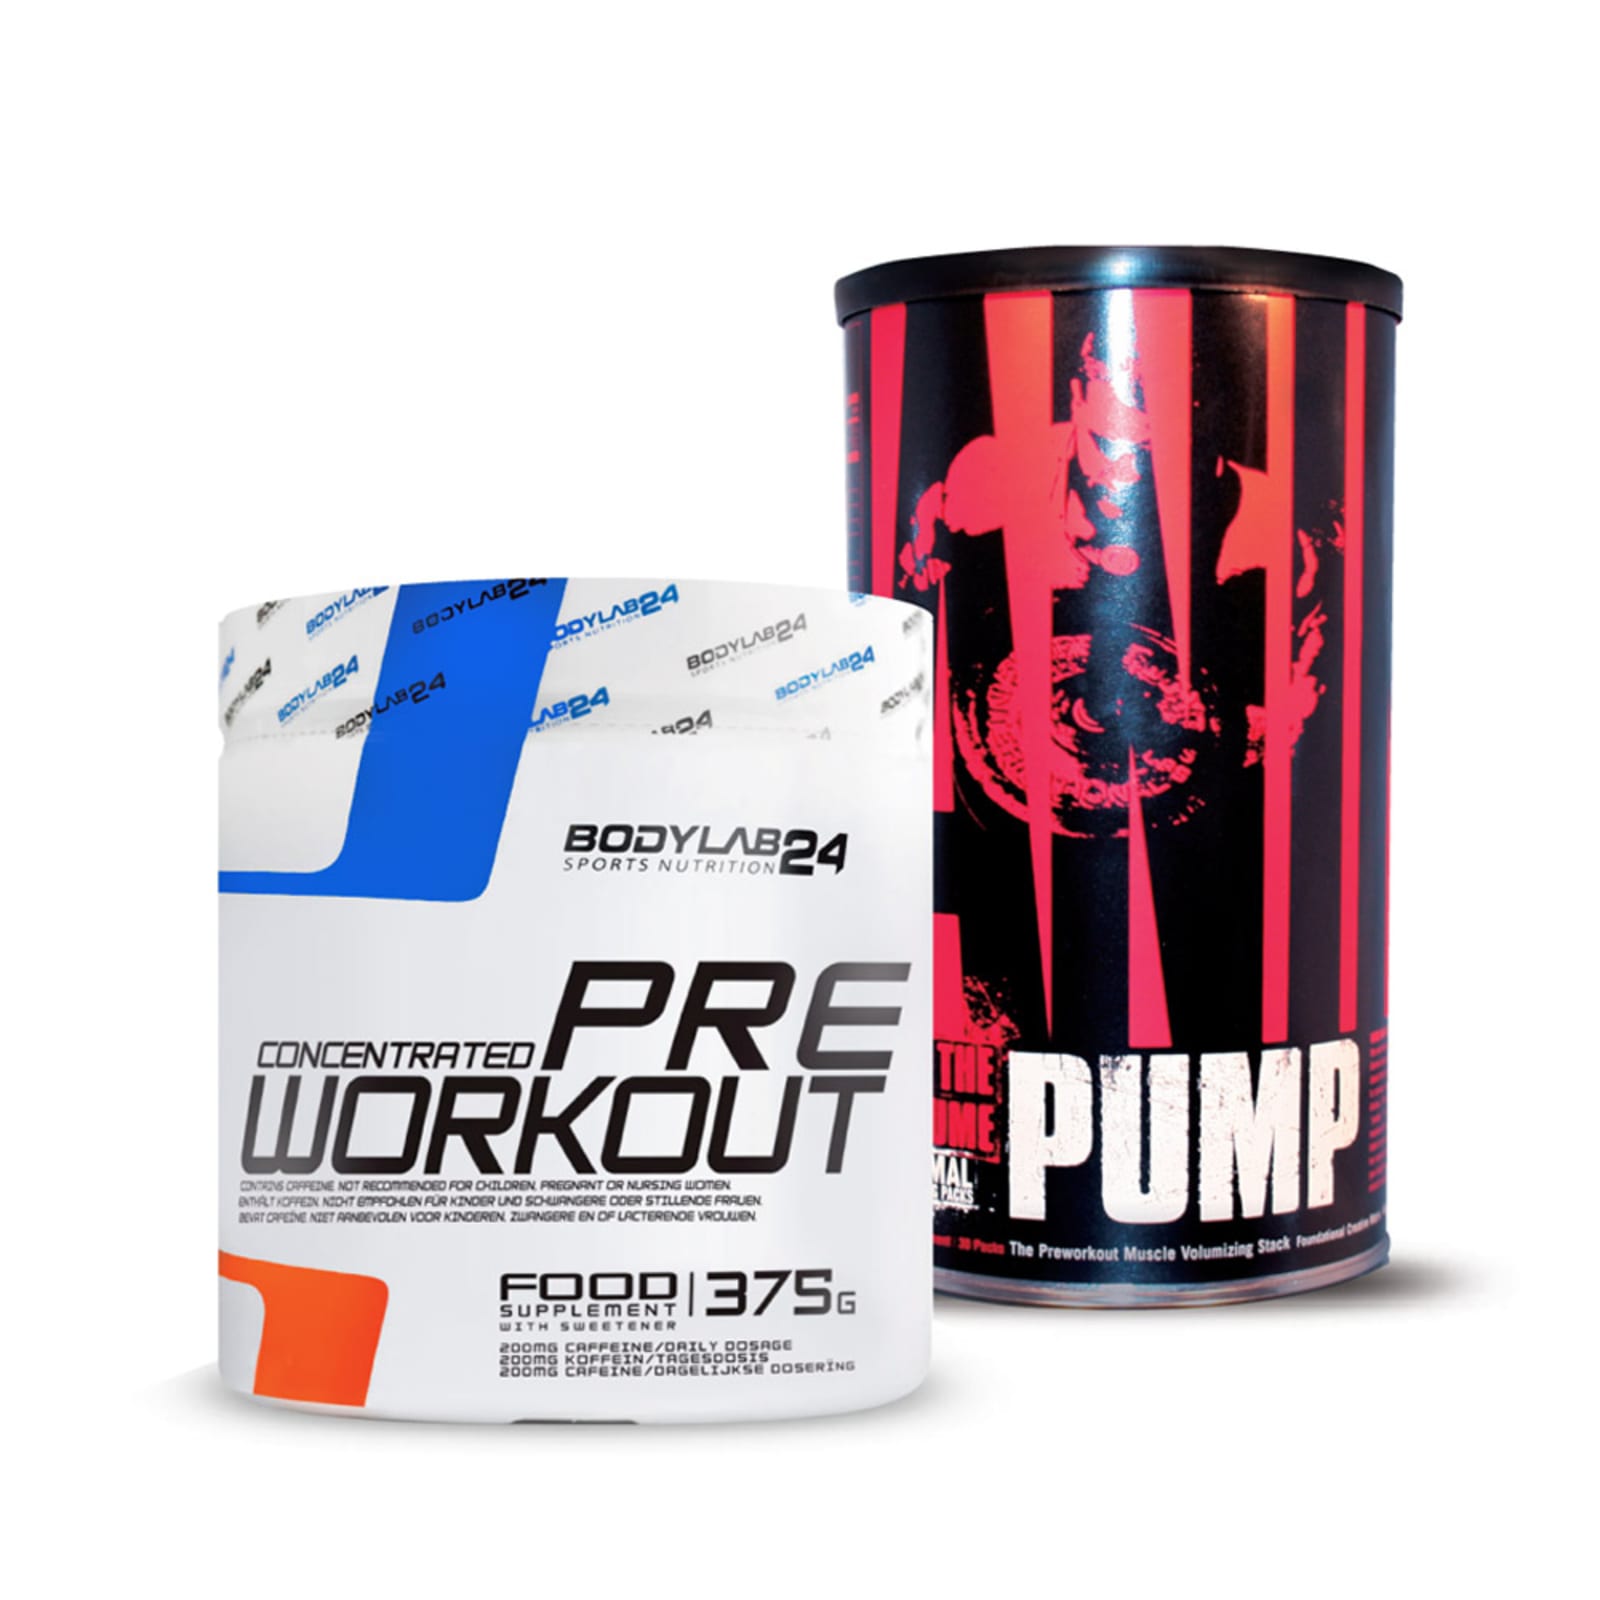 6 Day Animal Pump Pre Workout Review for Push Pull Legs